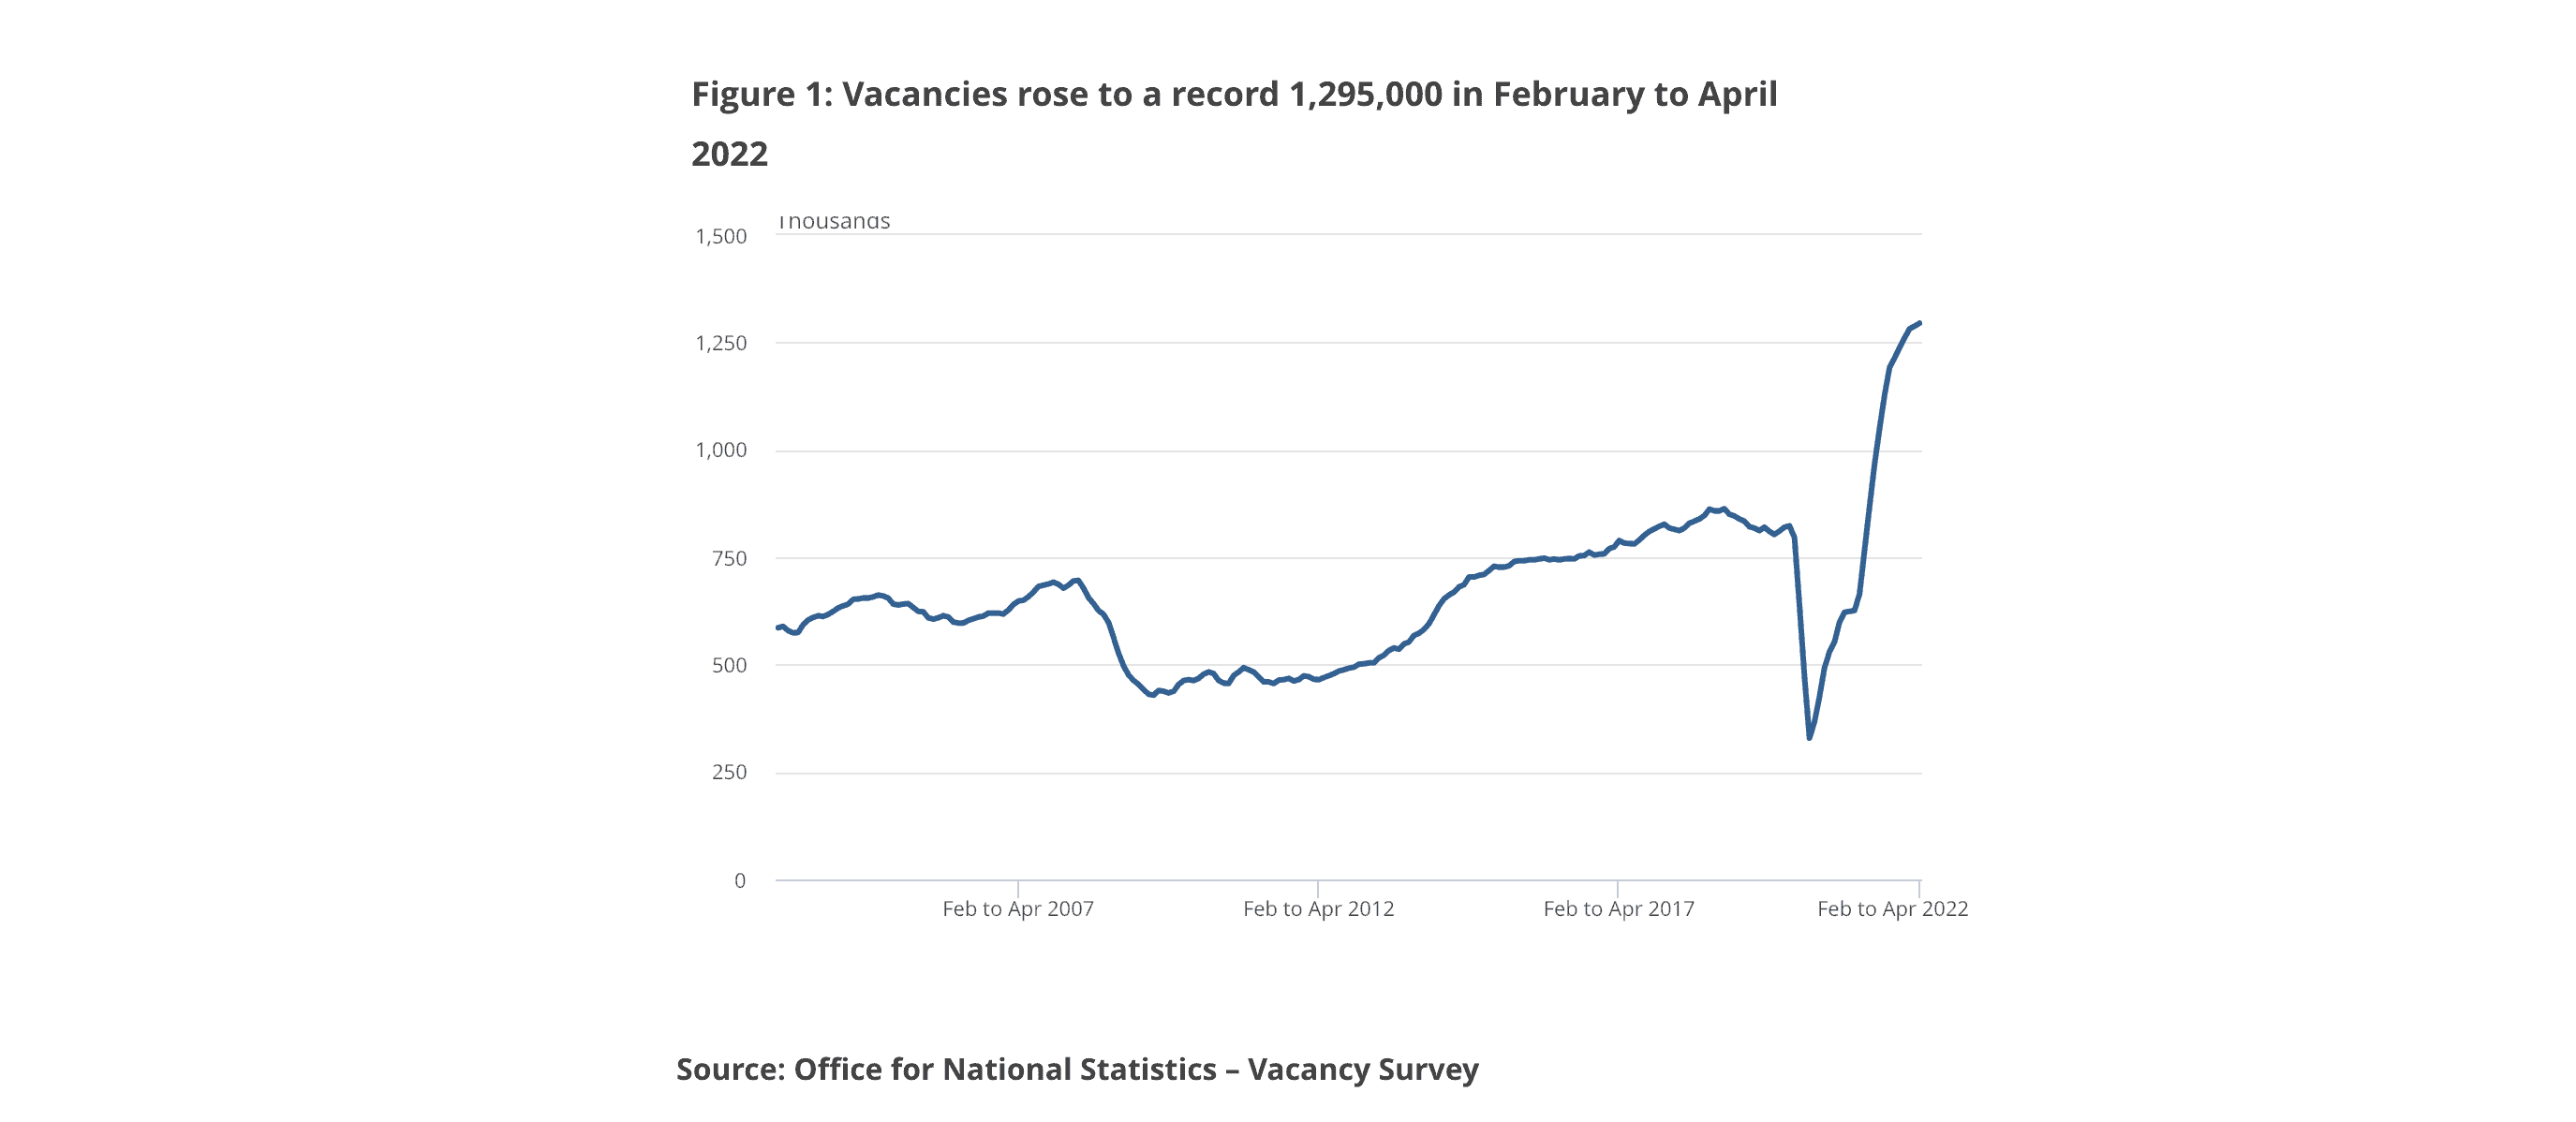 Graph to show vacancies rose to a record 1,295,000 in February to April 2022